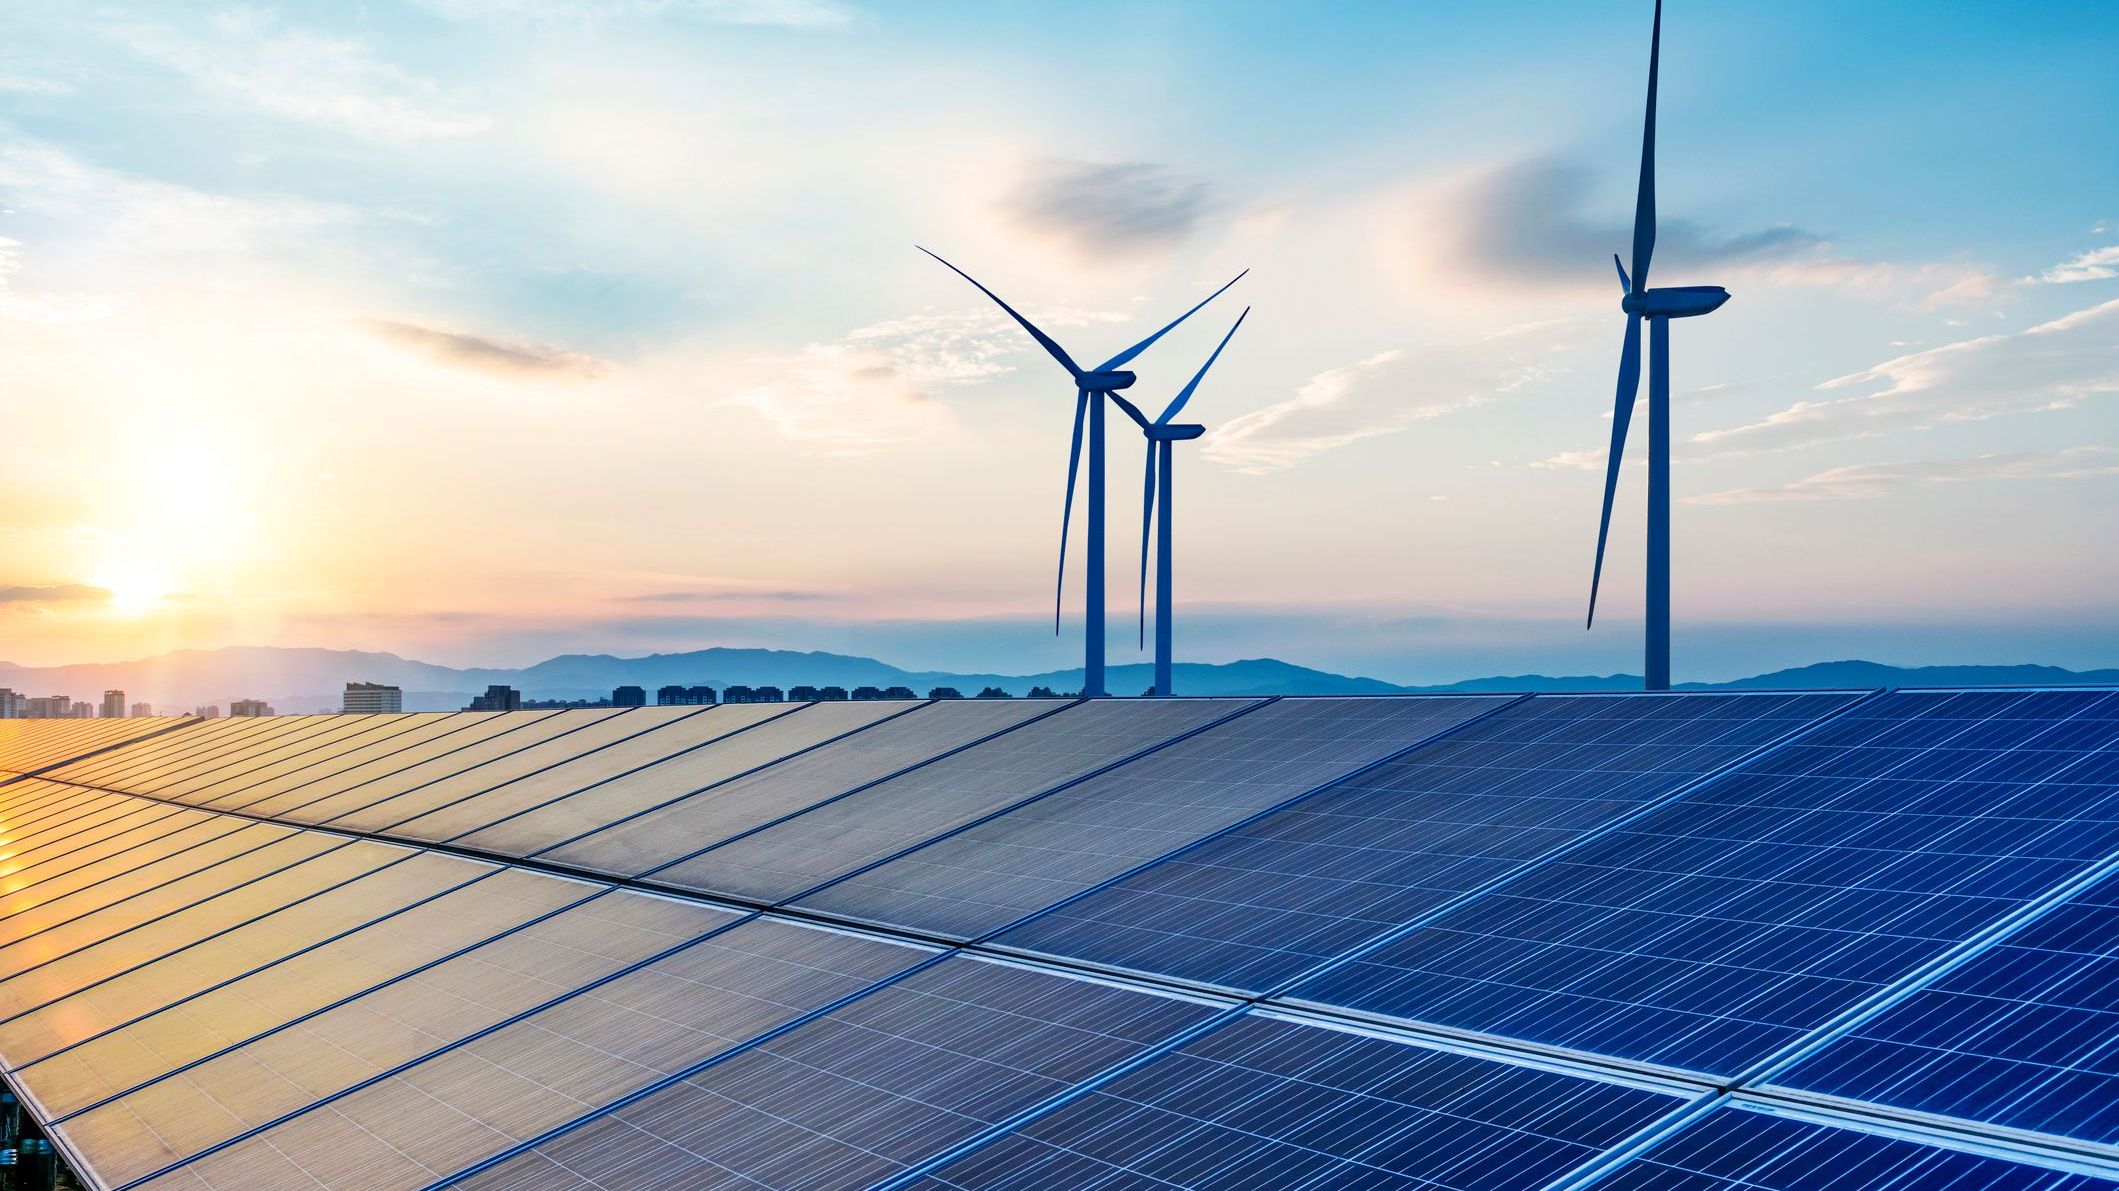 Solar panels and wind turbines are two types of sustainable energy initiatives that green bonds may support.